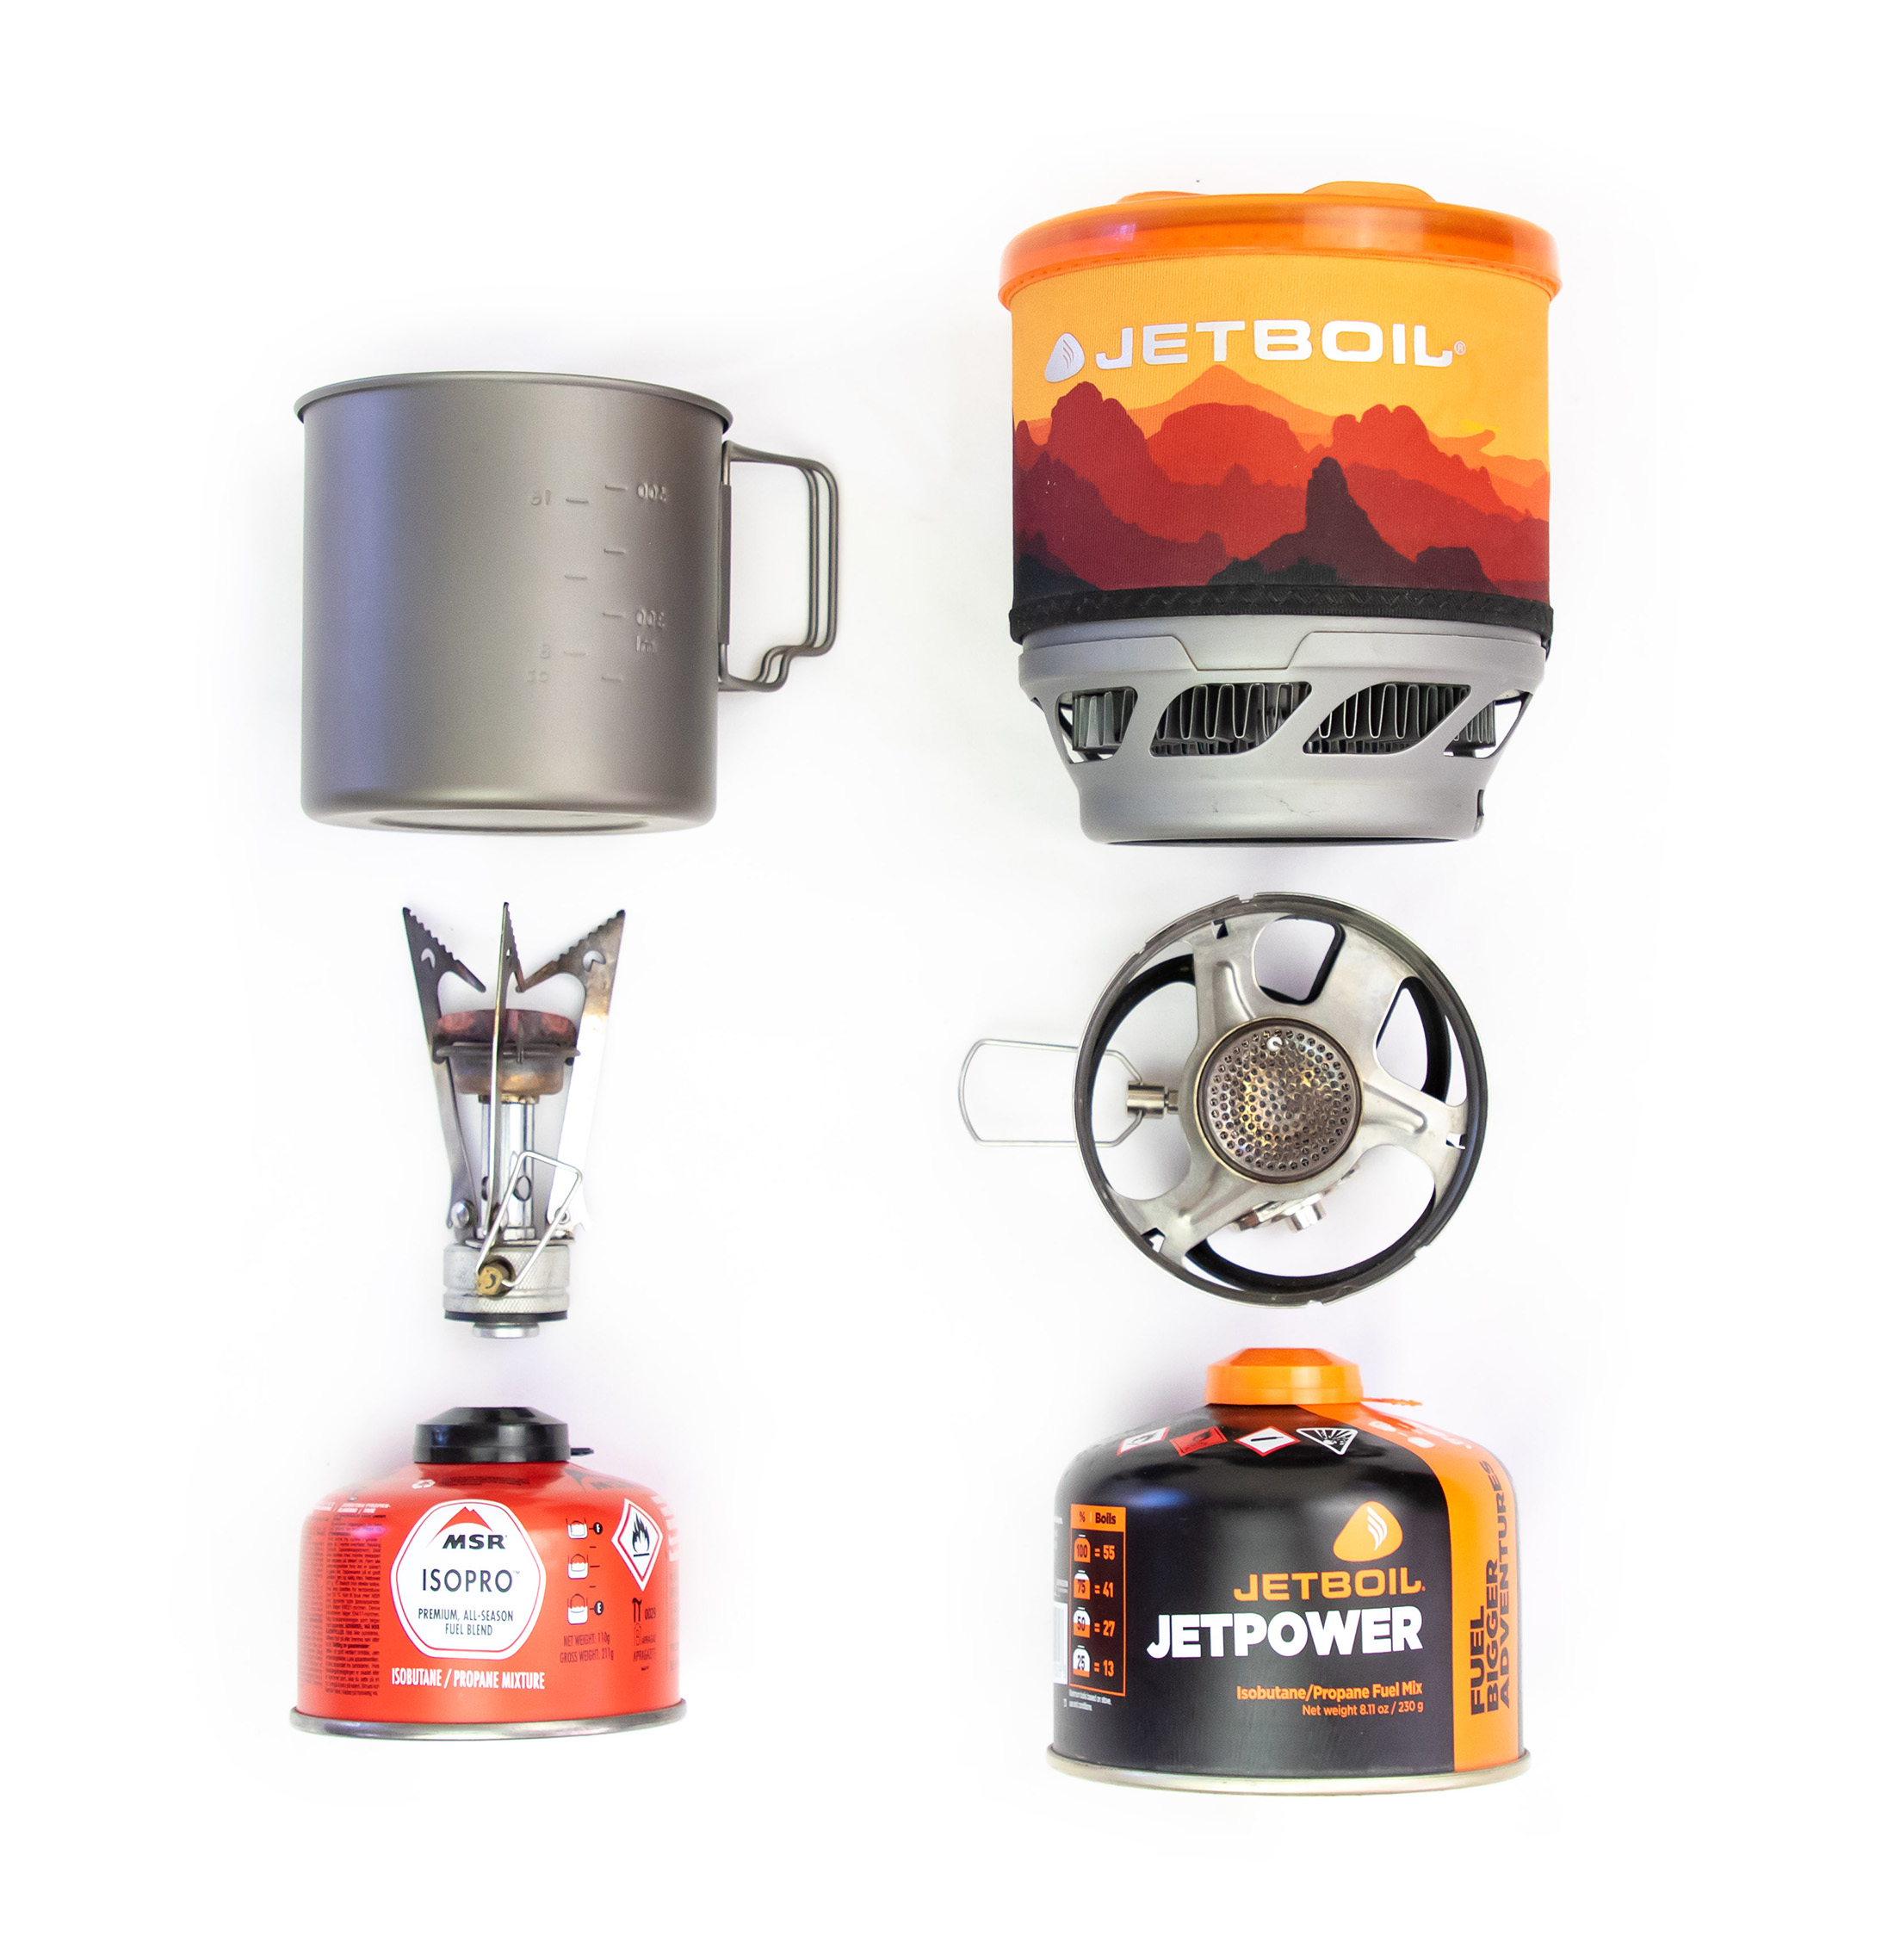 two types of canister stove